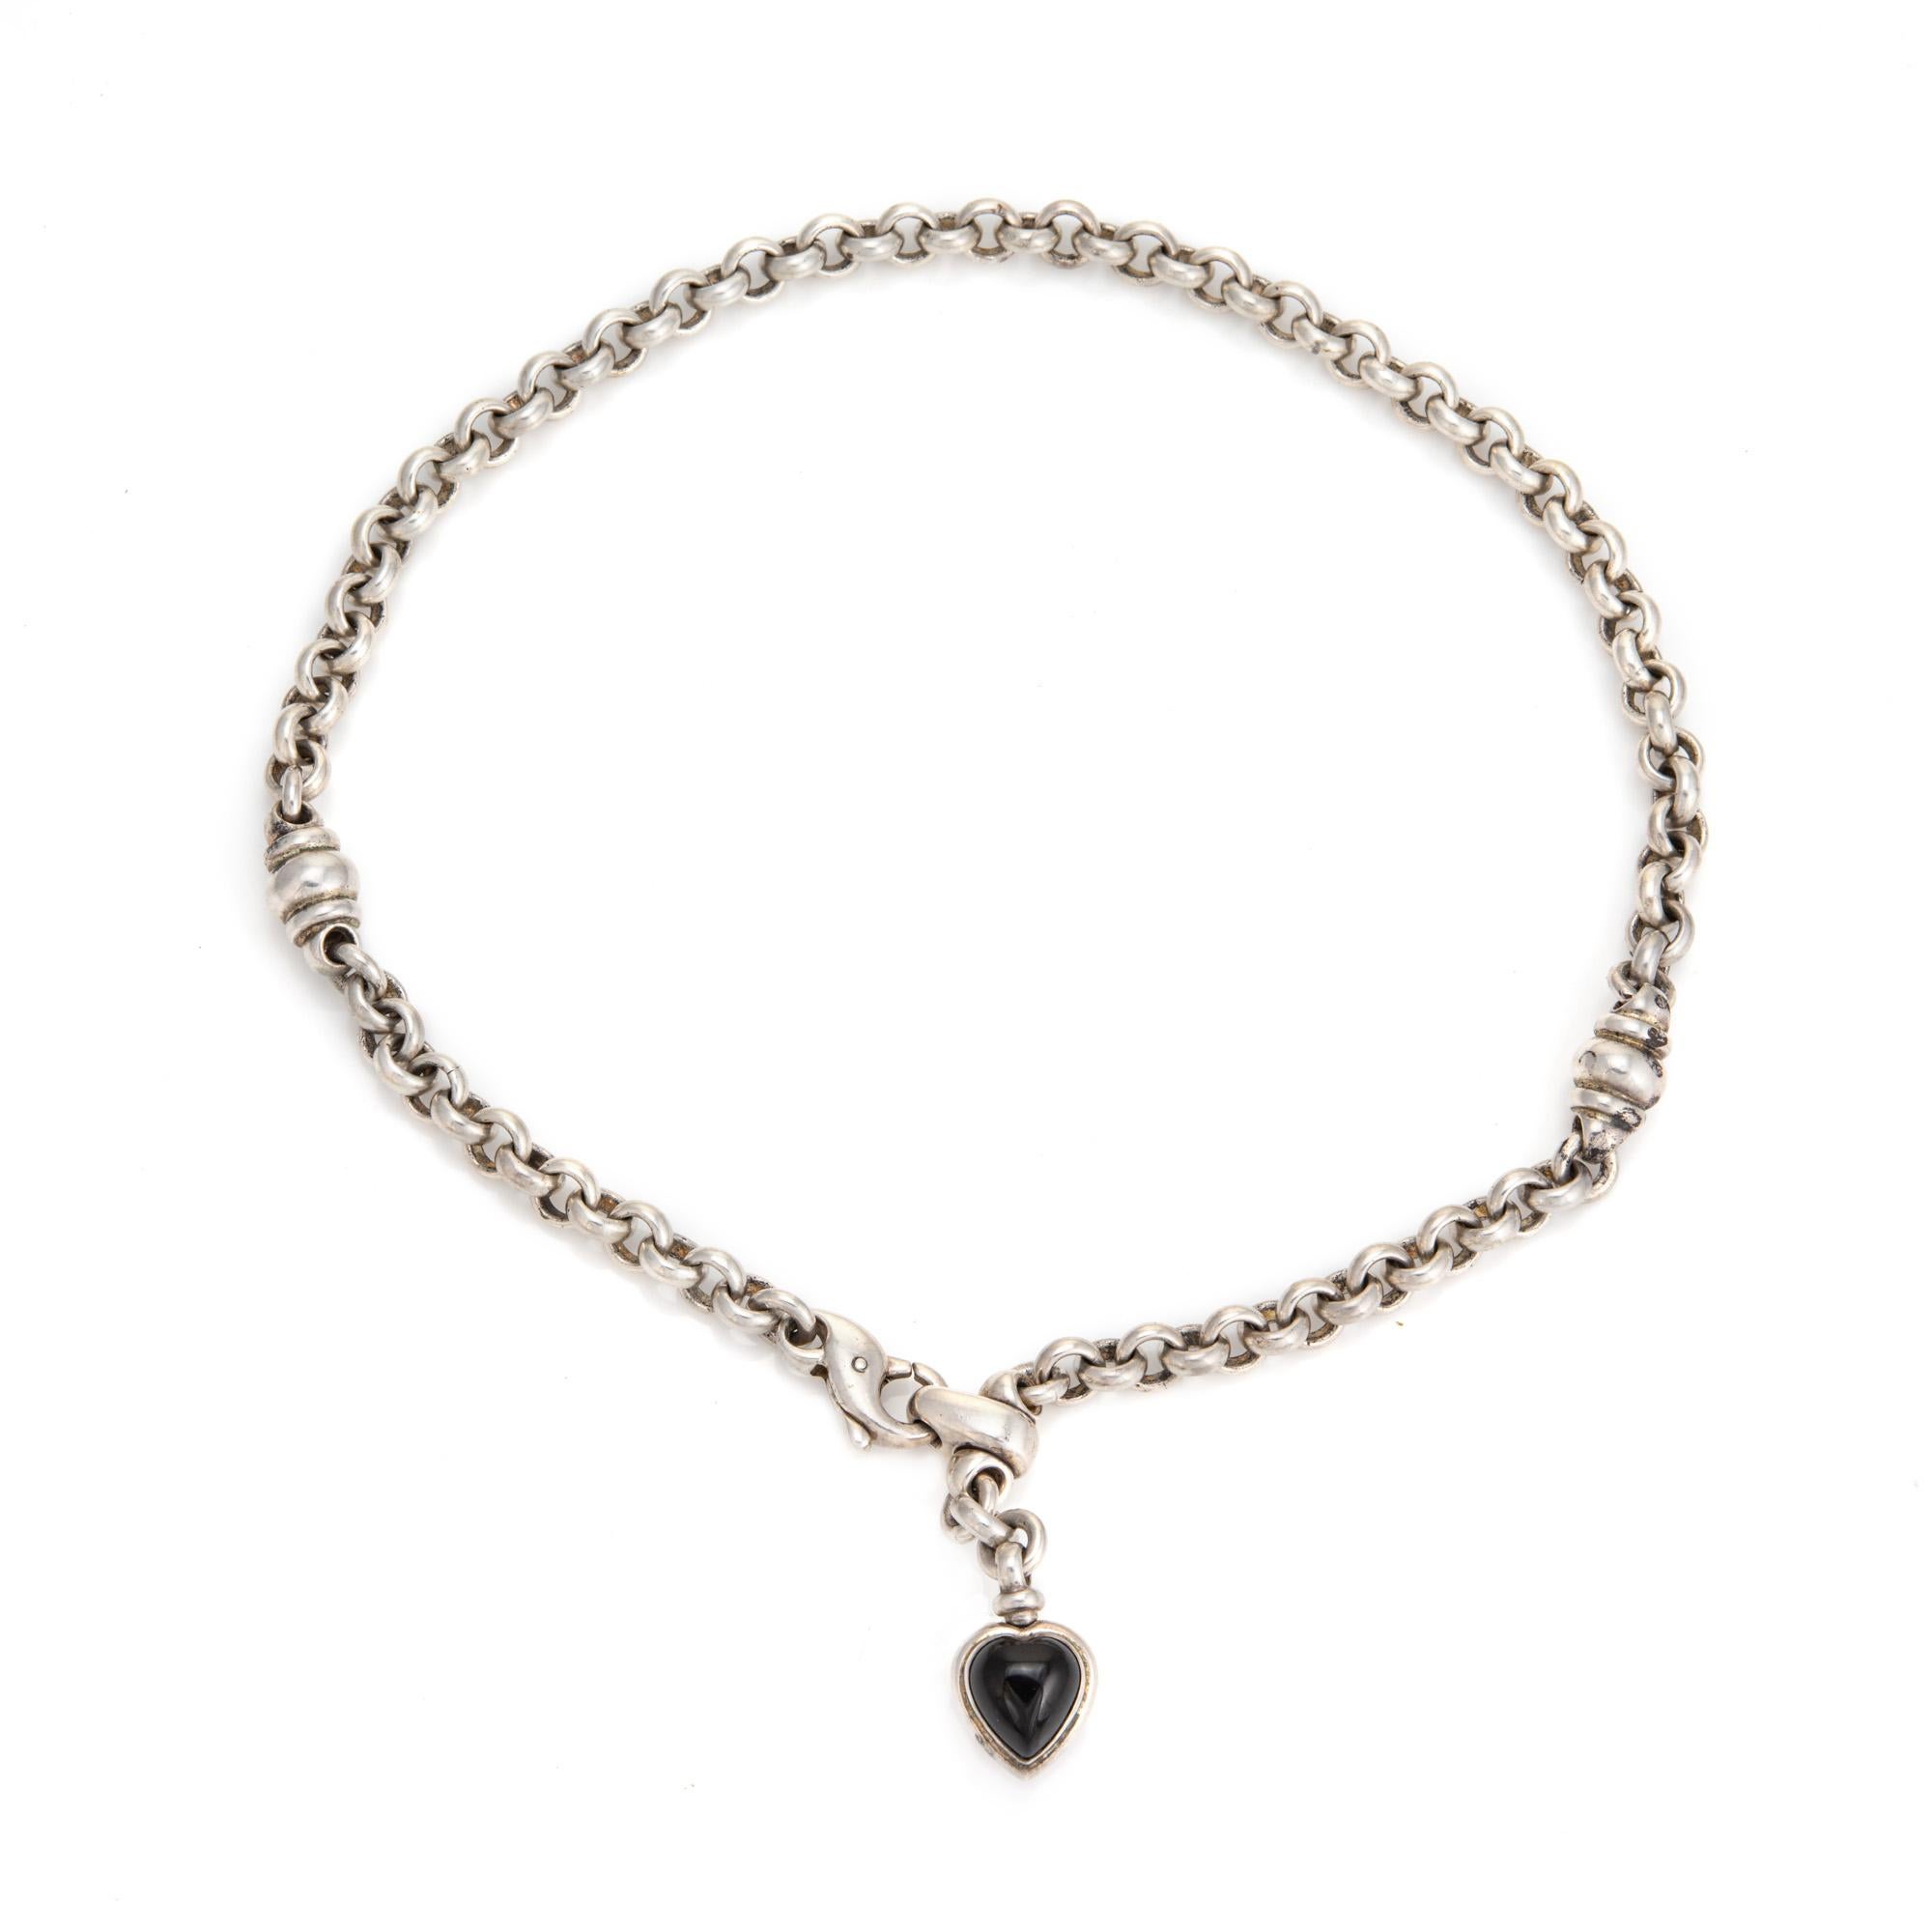 Stylish and finely detailed vintage Tiffany & Co heart necklace, crafted in sterling silver (circa 1990s).  

The necklace features a reversible cabochon cut onyx and carnelian heart shaped pendant drop (the stones measure 11.5mm each). Measuring 17